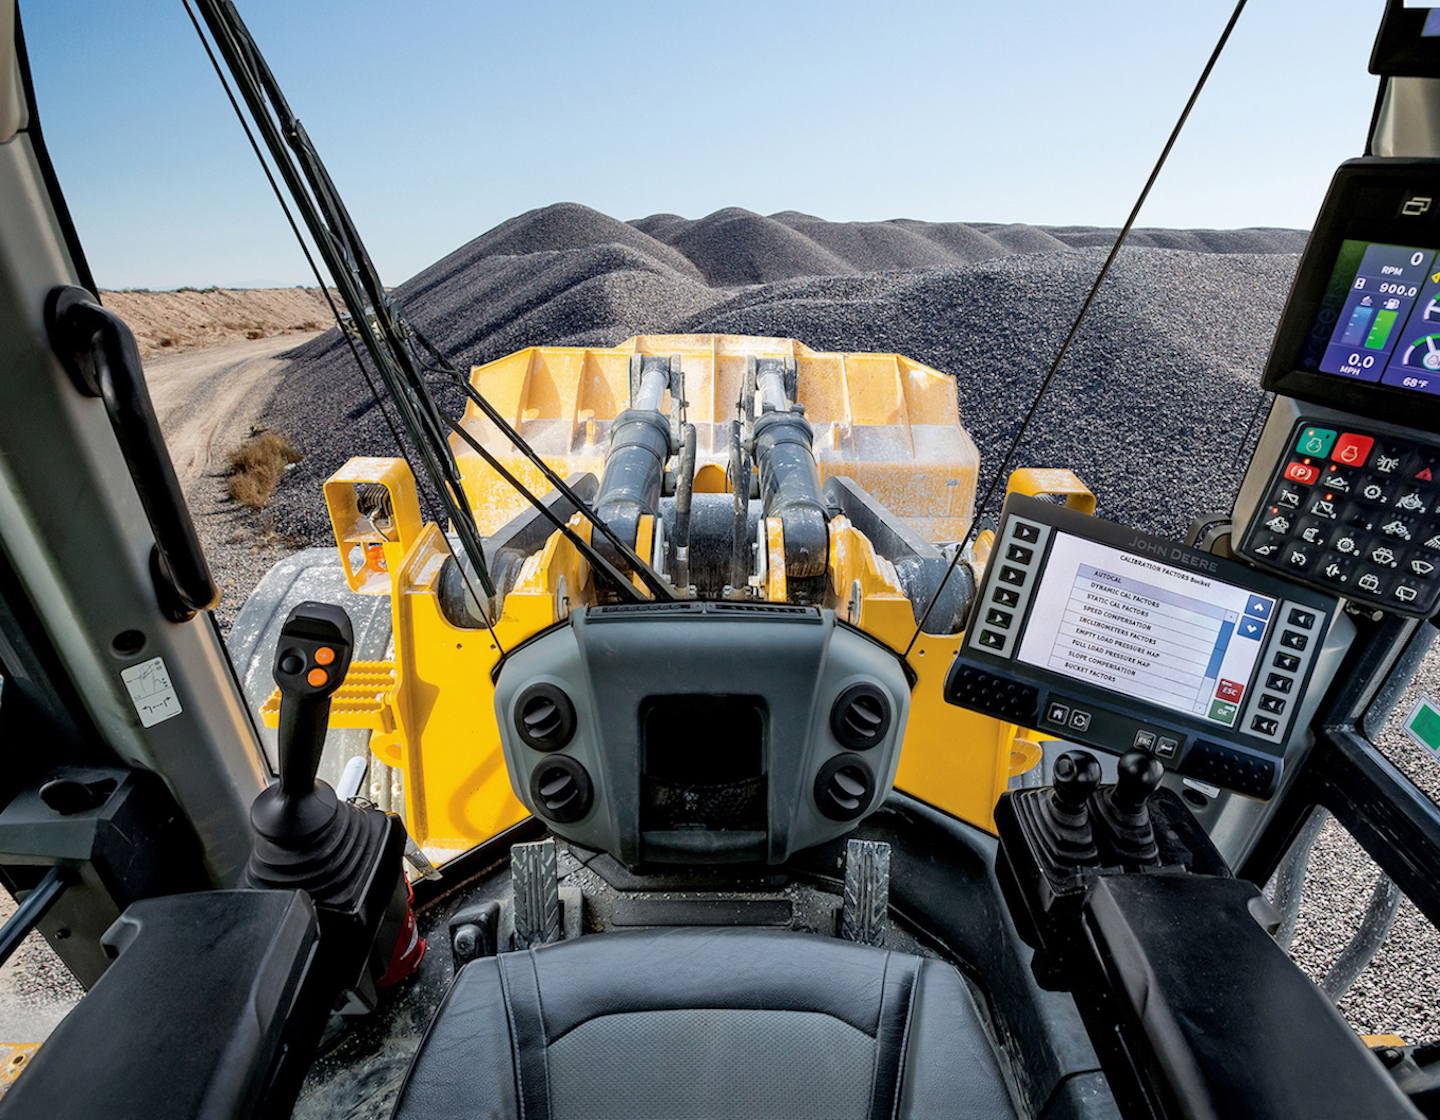 Deere Offering Factory Installed Payload Weighing On L Series Wheel Loaders Equipment World